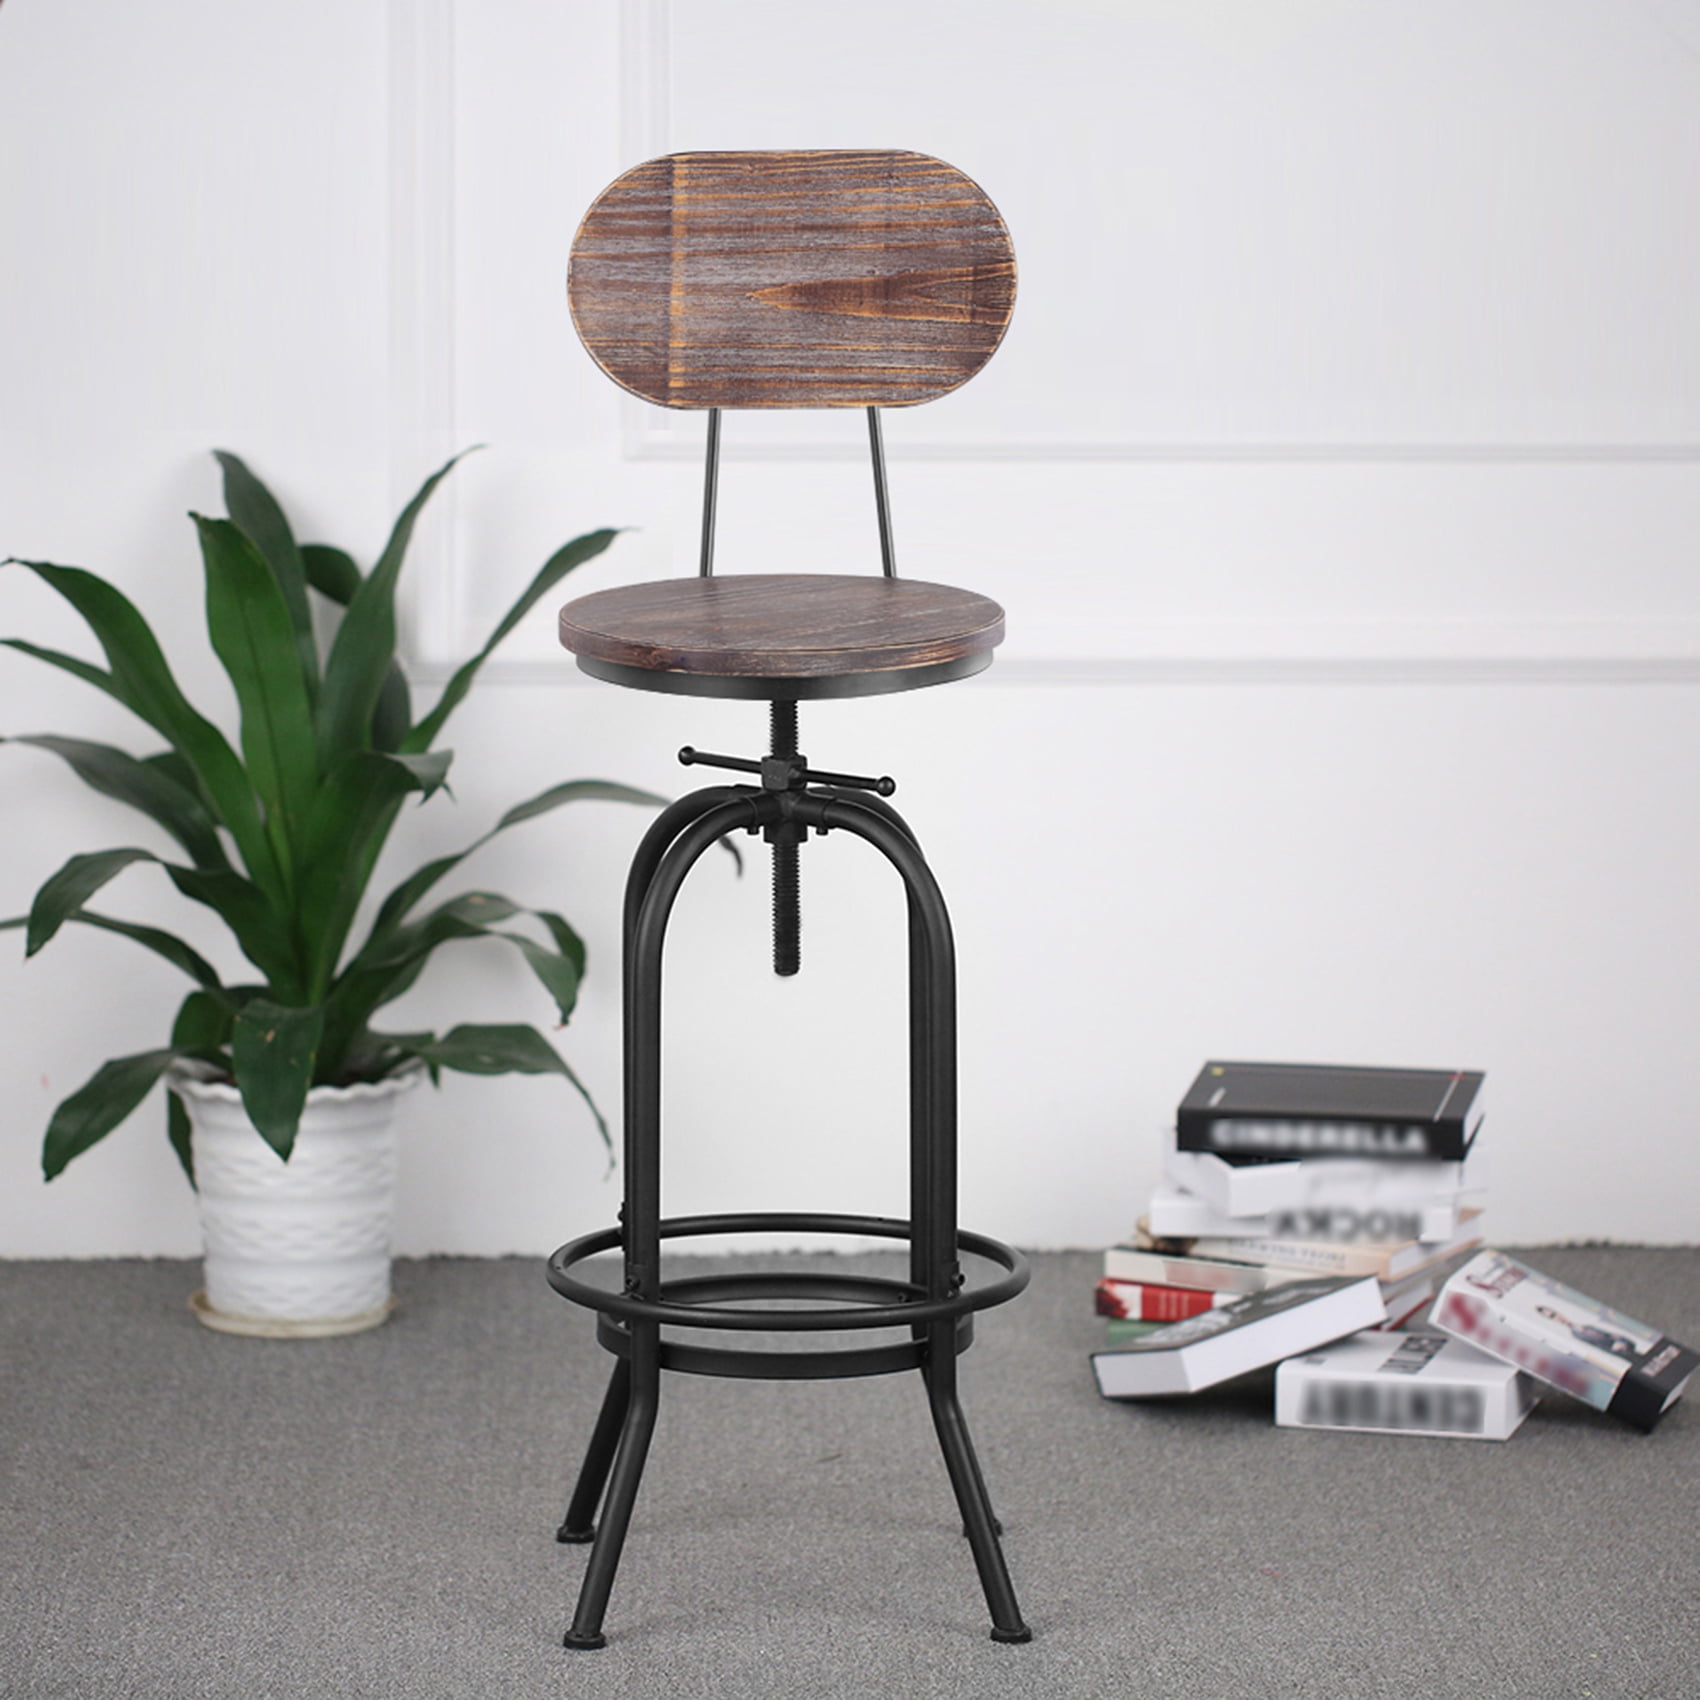 Queiting Industrial Bar Stool Kitchen Vintage Dining Chair Wooden Swivel Stool With Backrest Ajustable Height